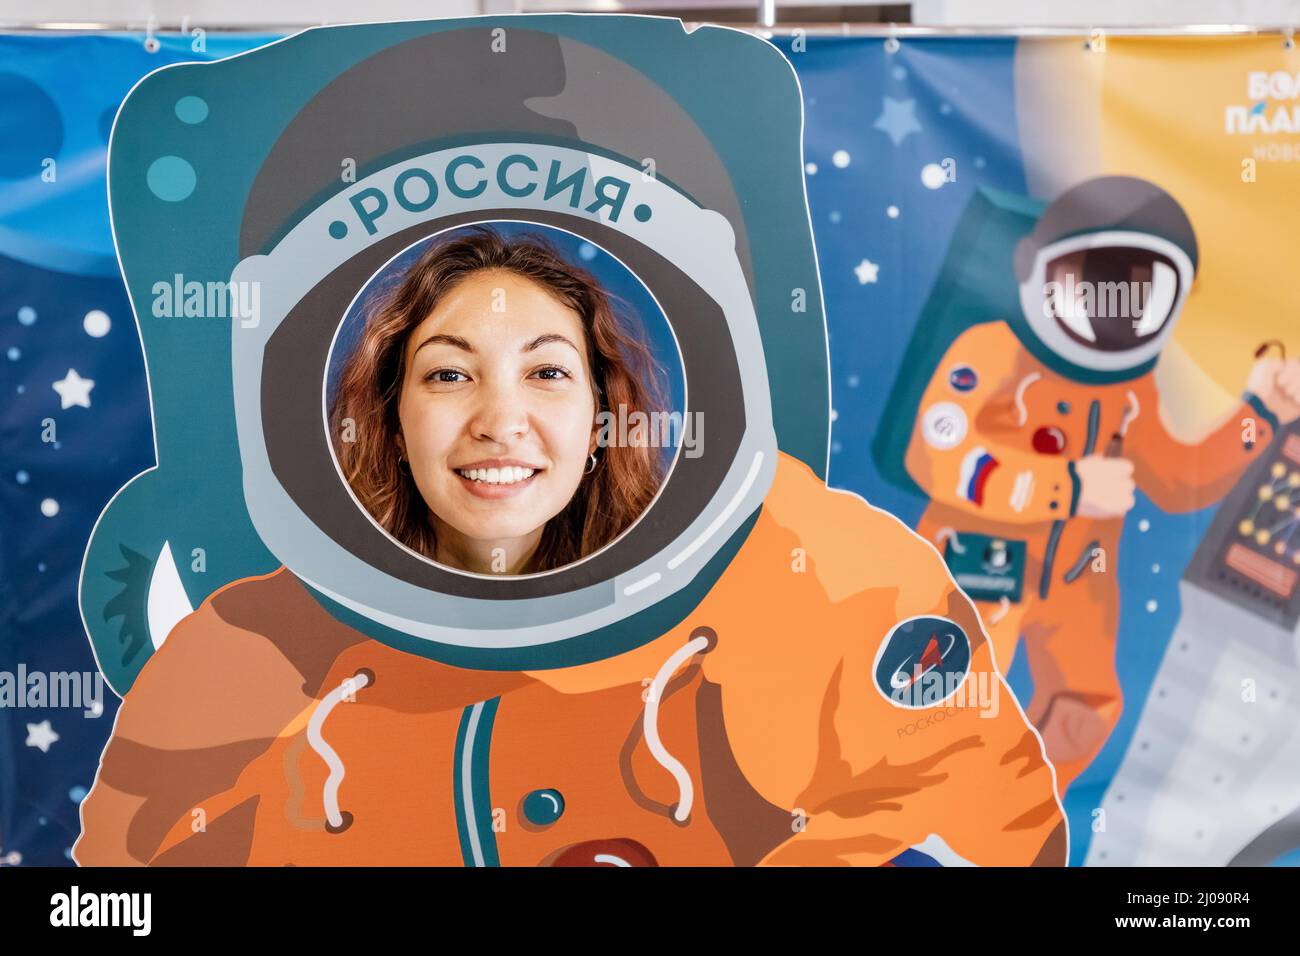 10 July 2021, Novosibirsk, Russia: Happy woman is photographed in the scenery in an astronaut's space suit with the Roscosmos label Stock Photo